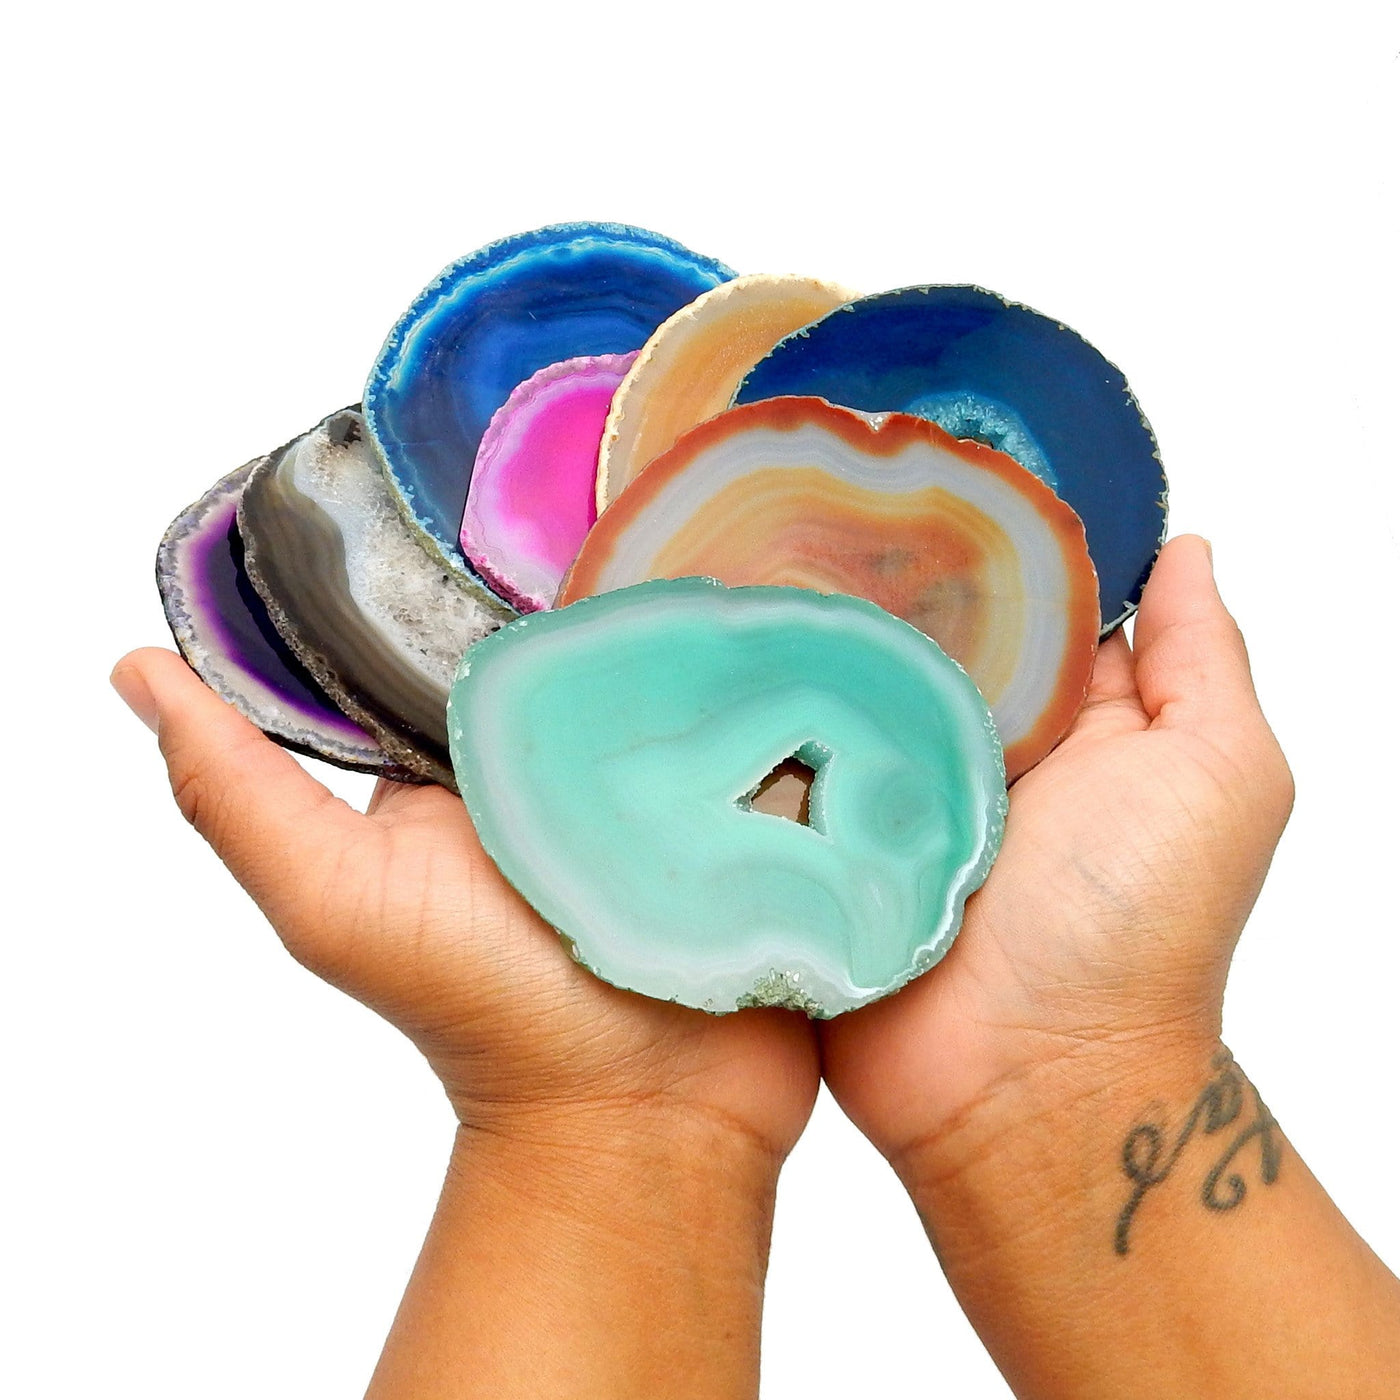 Pink Agate Slices and other colors in 2 hands